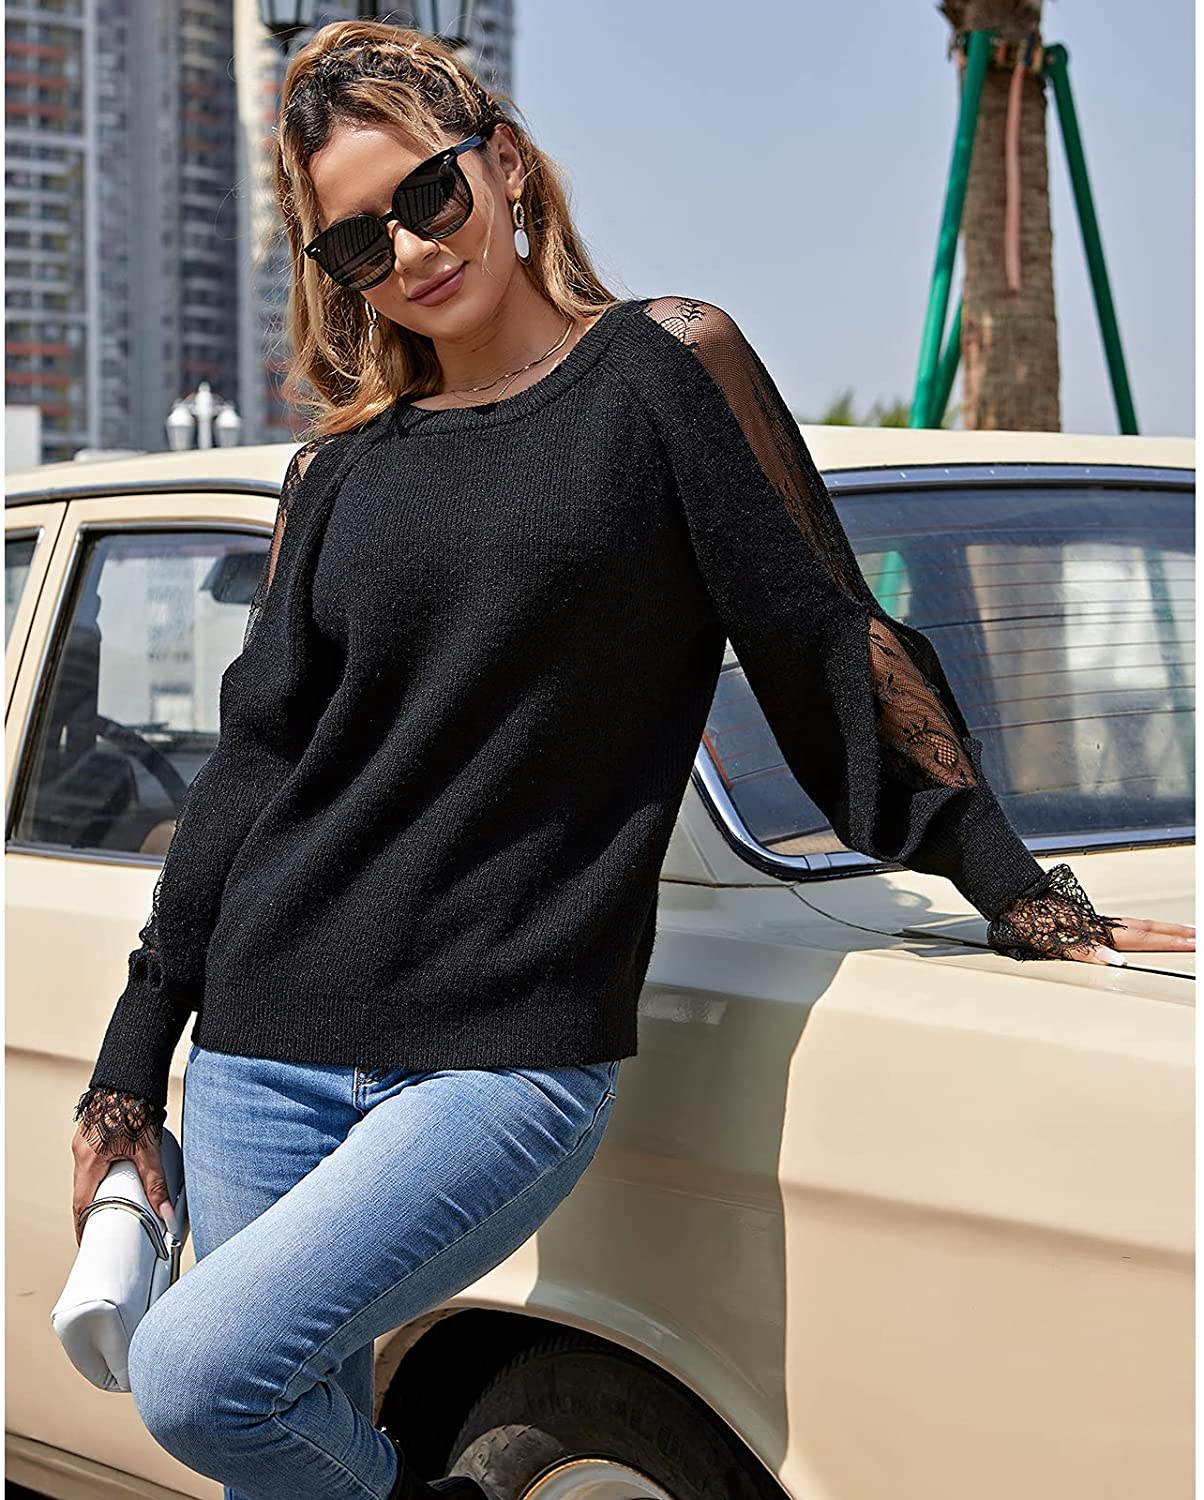 EXLURA Women's Long Sleeve Sweater Cold Shoulder Round Neck Lace Patchwork Tops Chunky Casual Pullover Sweater